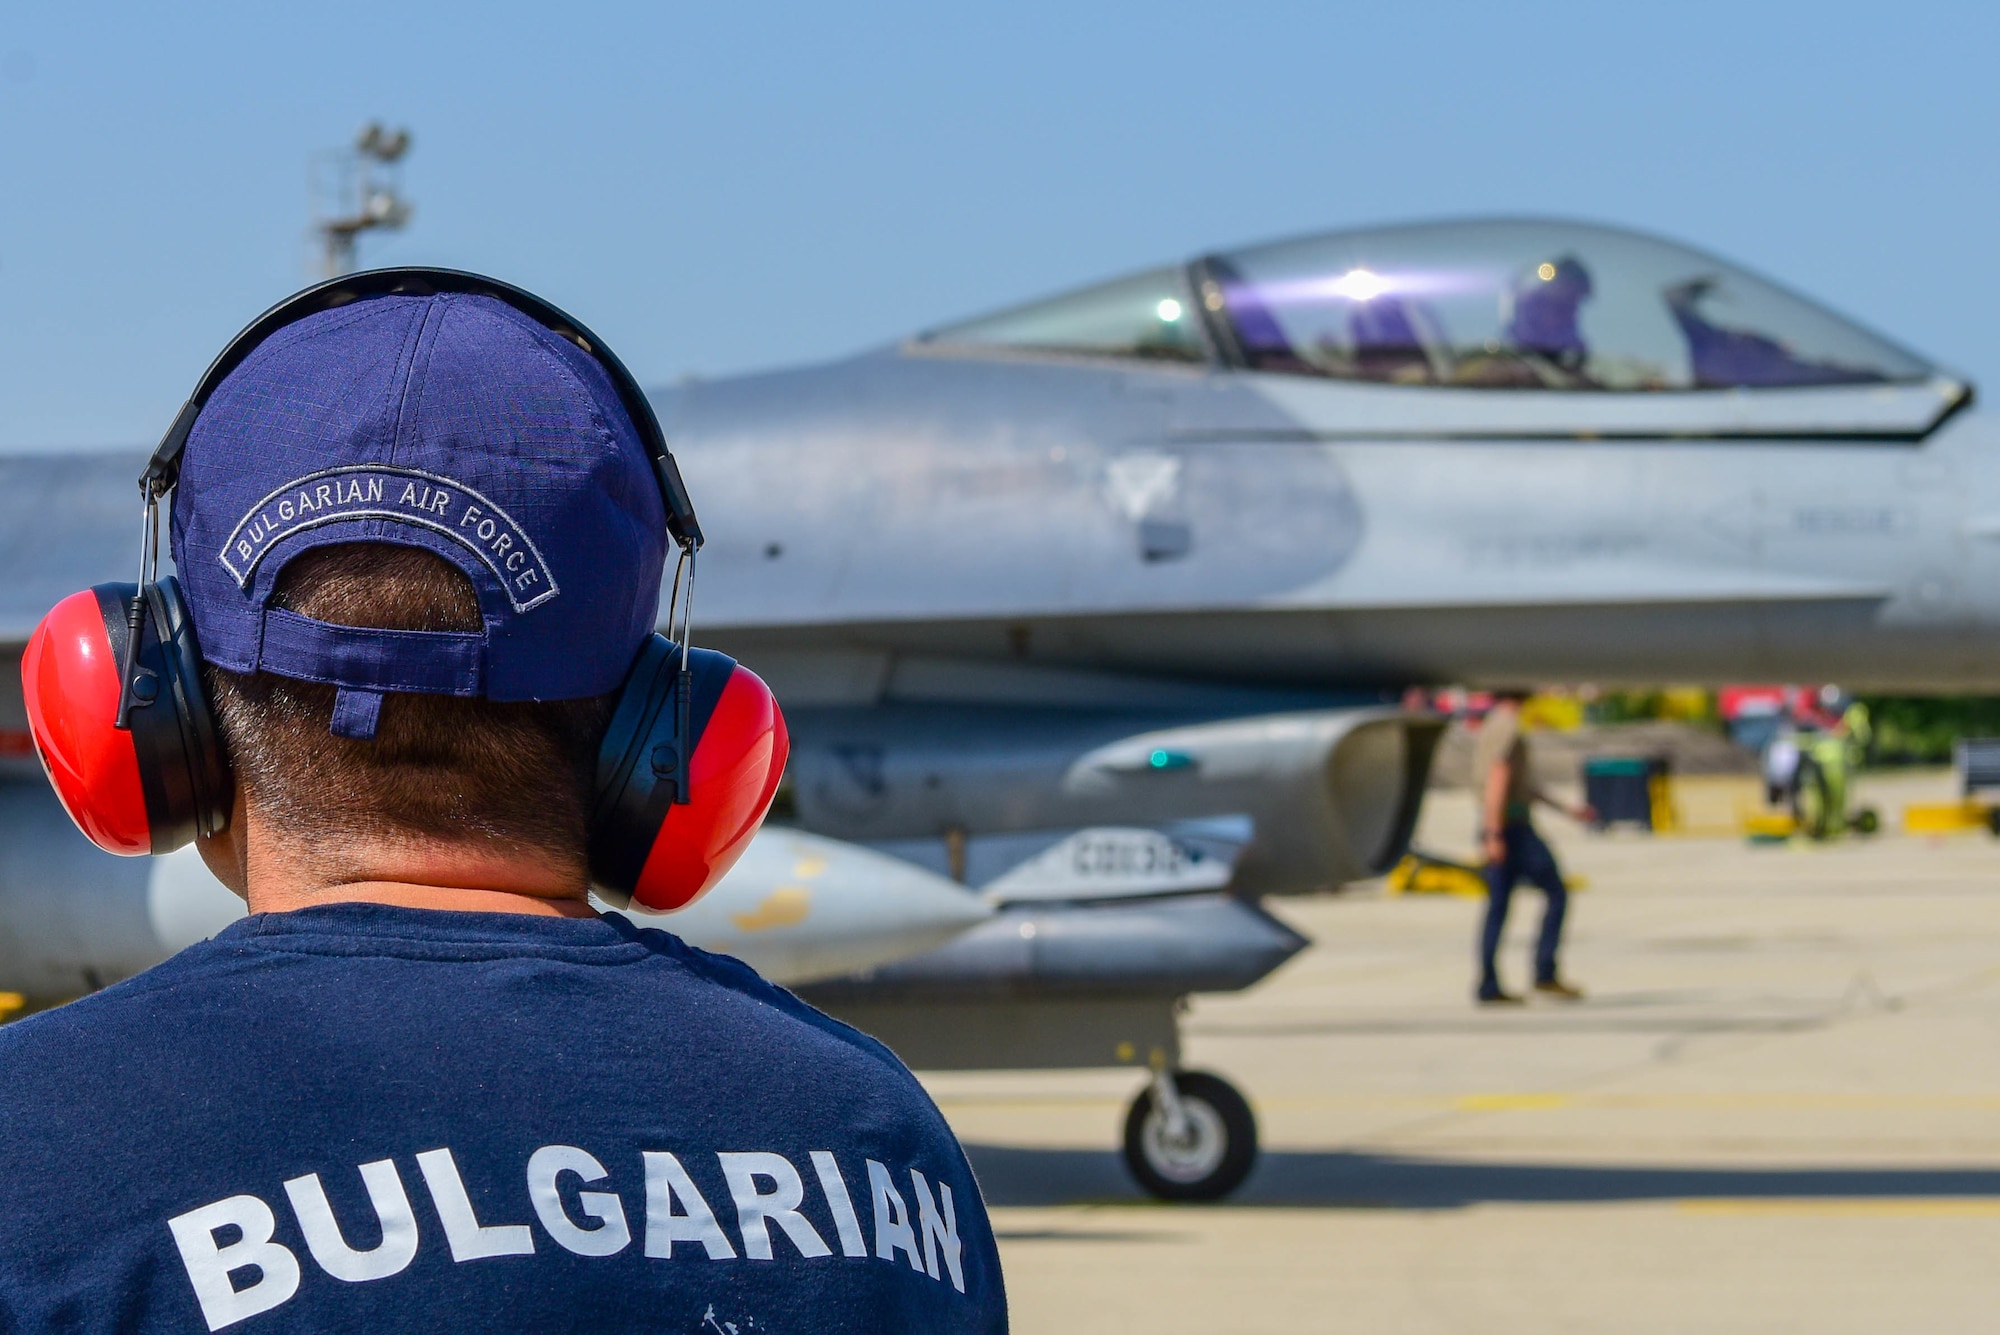 A Bulgarian air force member looks at a U.S. Air Force F-16 Fighting Falcon assigned to the 555th Fighter Squadron during exercise Thracian Star 21 at Graf Ignatievo Air Base, Bulgaria, July 16, 2021. Thracian Star 21 is a Bulgarian air force-led exercise aiming to enhance interoperability and the ability to rapidly deploy to remote locations. (U.S. Air Force photo by Airman 1st Class Brooke Moeder)